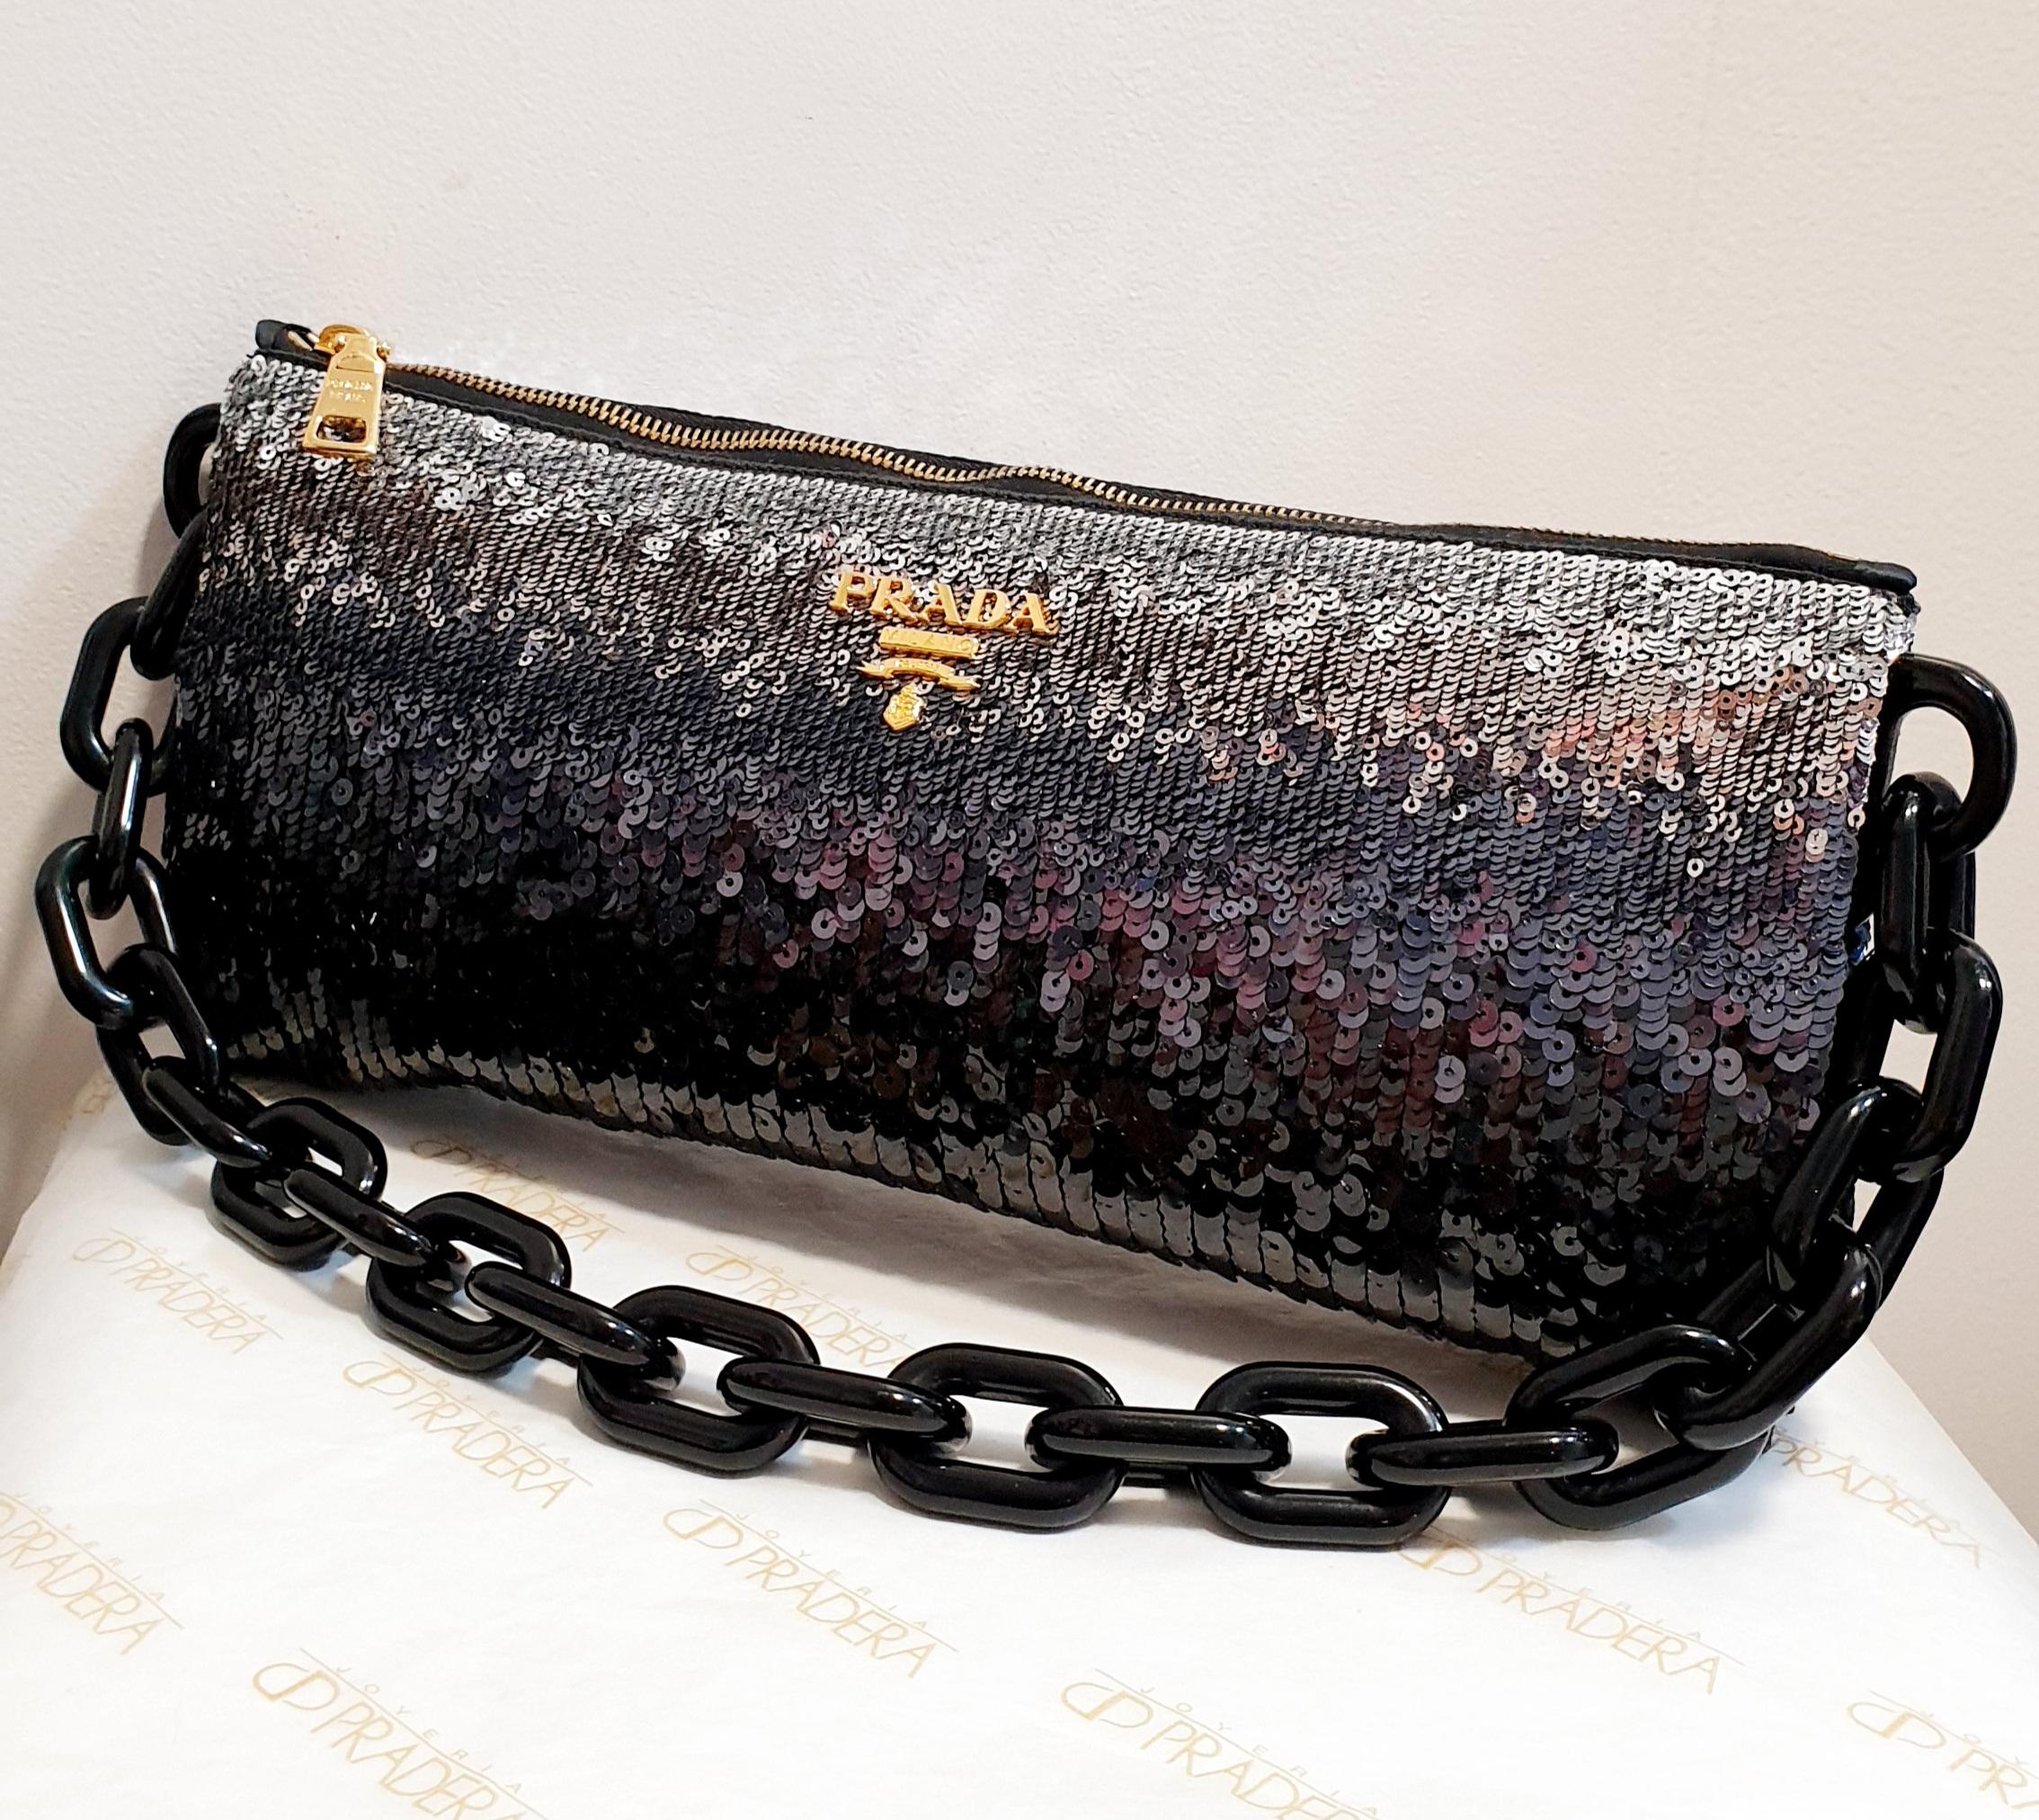 Prada Gray black sequin baguette
This baguette features a sequined satin, resin chain, and a top zipper closure. 
Rest of boutique stock
New Never used
Original bag
Dimensions:
Length: 14 cm  5,51 inches
Width: 31 cm  12,20 inches
Depth: 4 cm  1,57